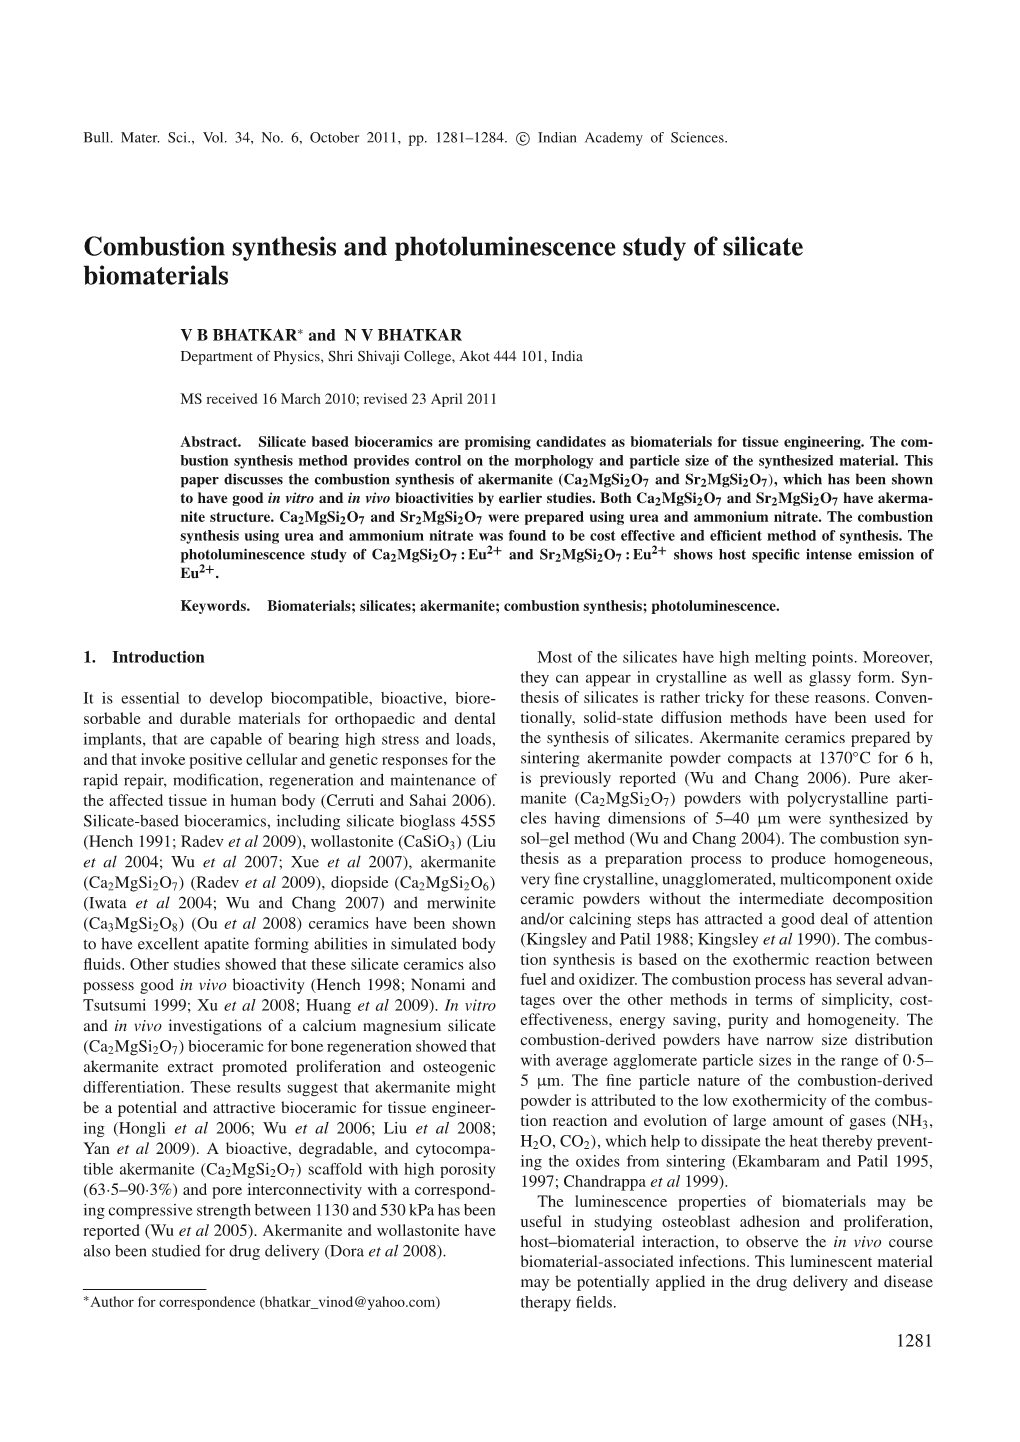 Combustion Synthesis and Photoluminescence Study of Silicate Biomaterials